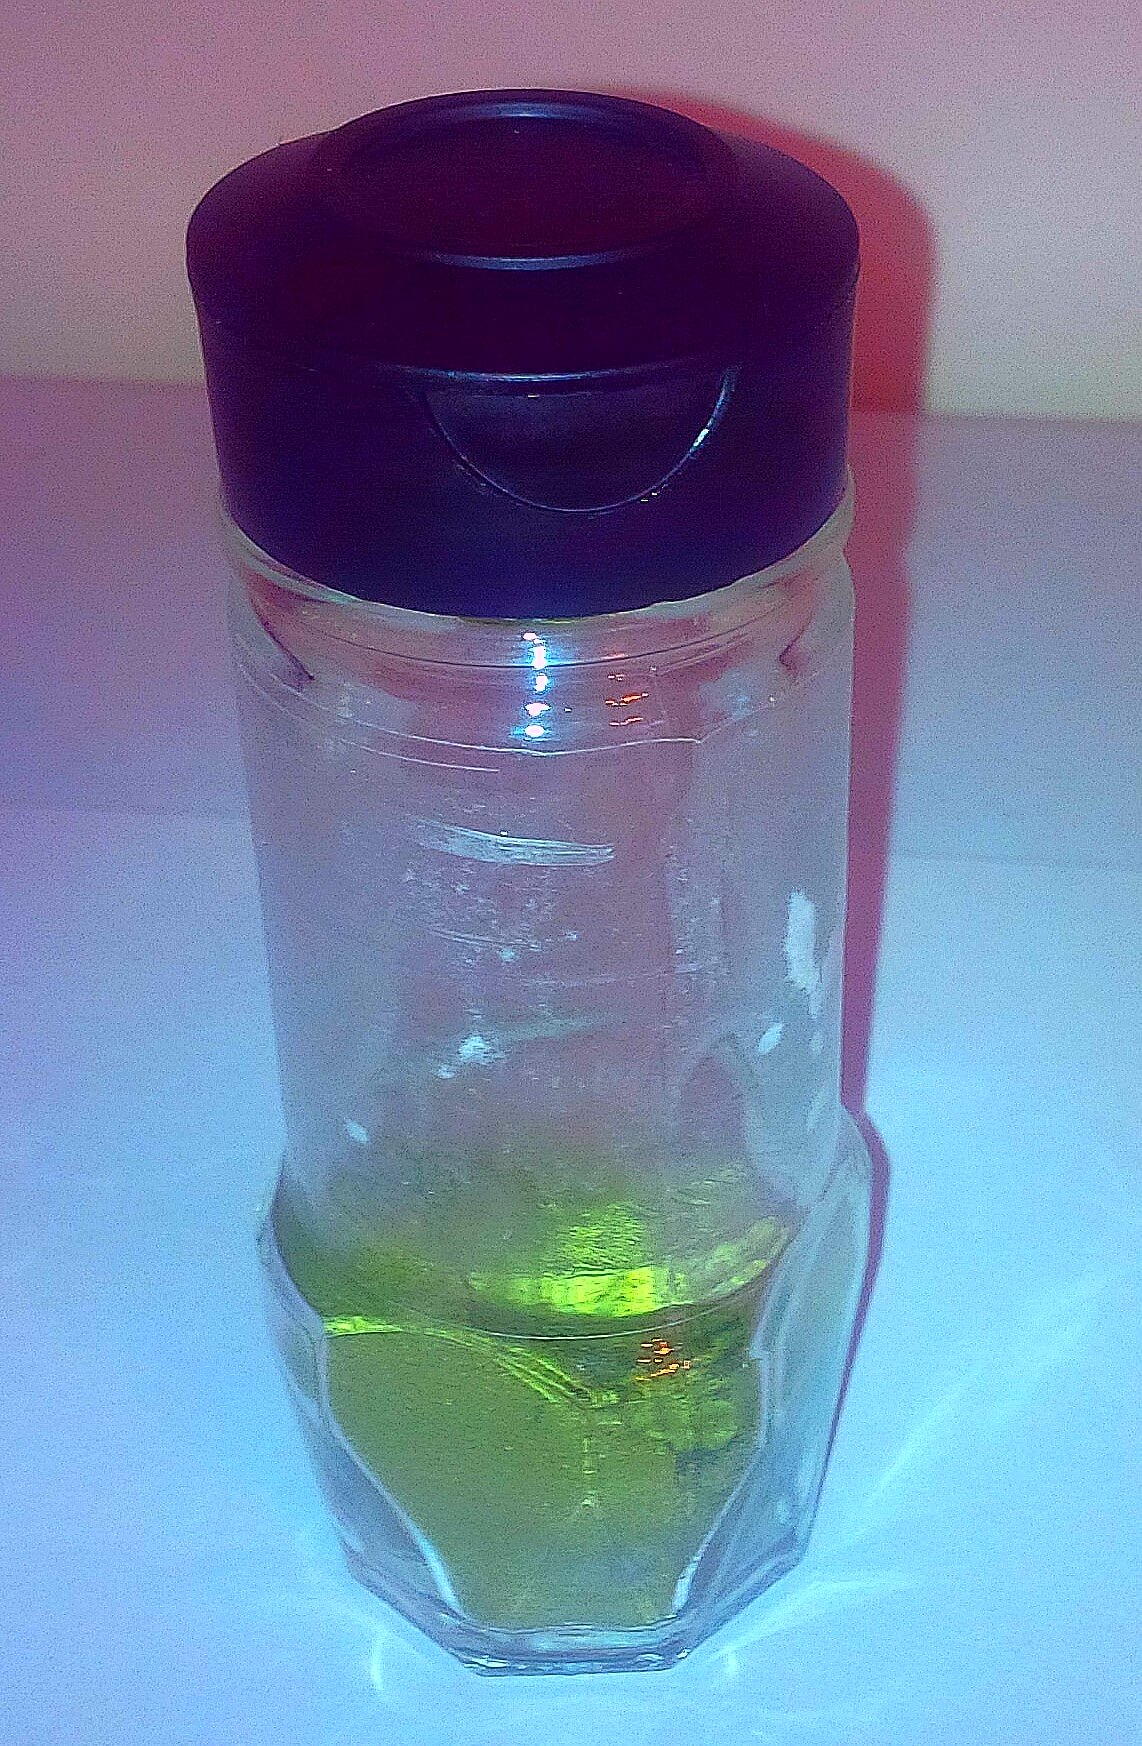 "Partially filled spice jar container with Bilal's EasyKale, an organic tasteless kale powder, showcasing its unique vibrant green color and freshness.